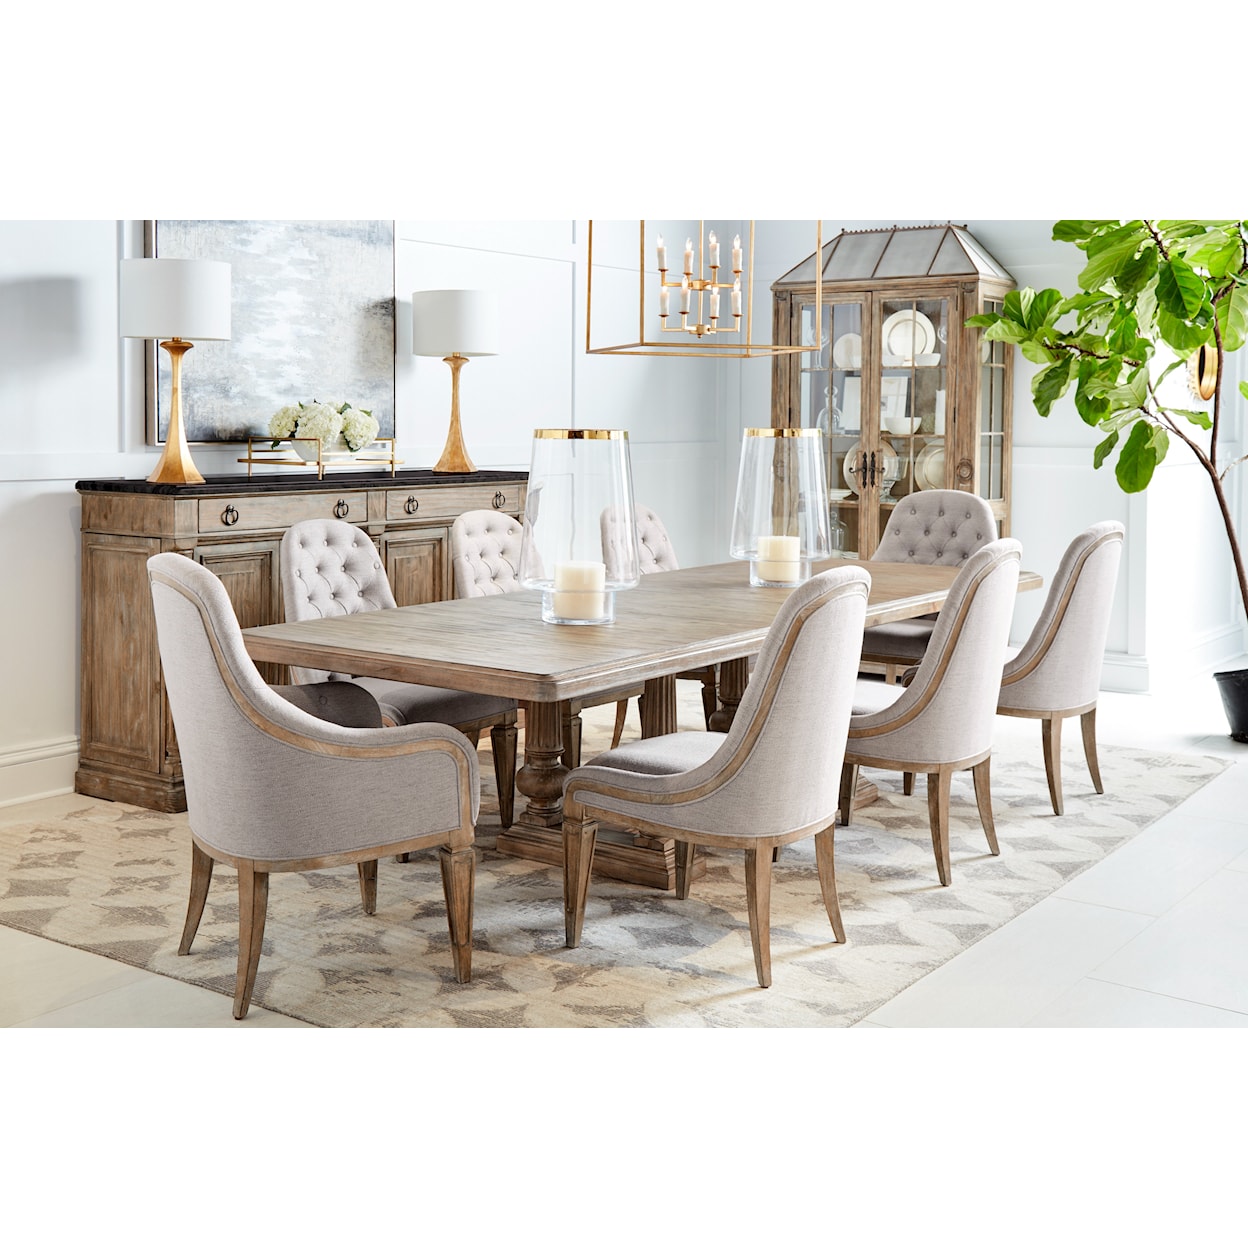 A.R.T. Furniture Inc Architrave 9-Piece Dining Set